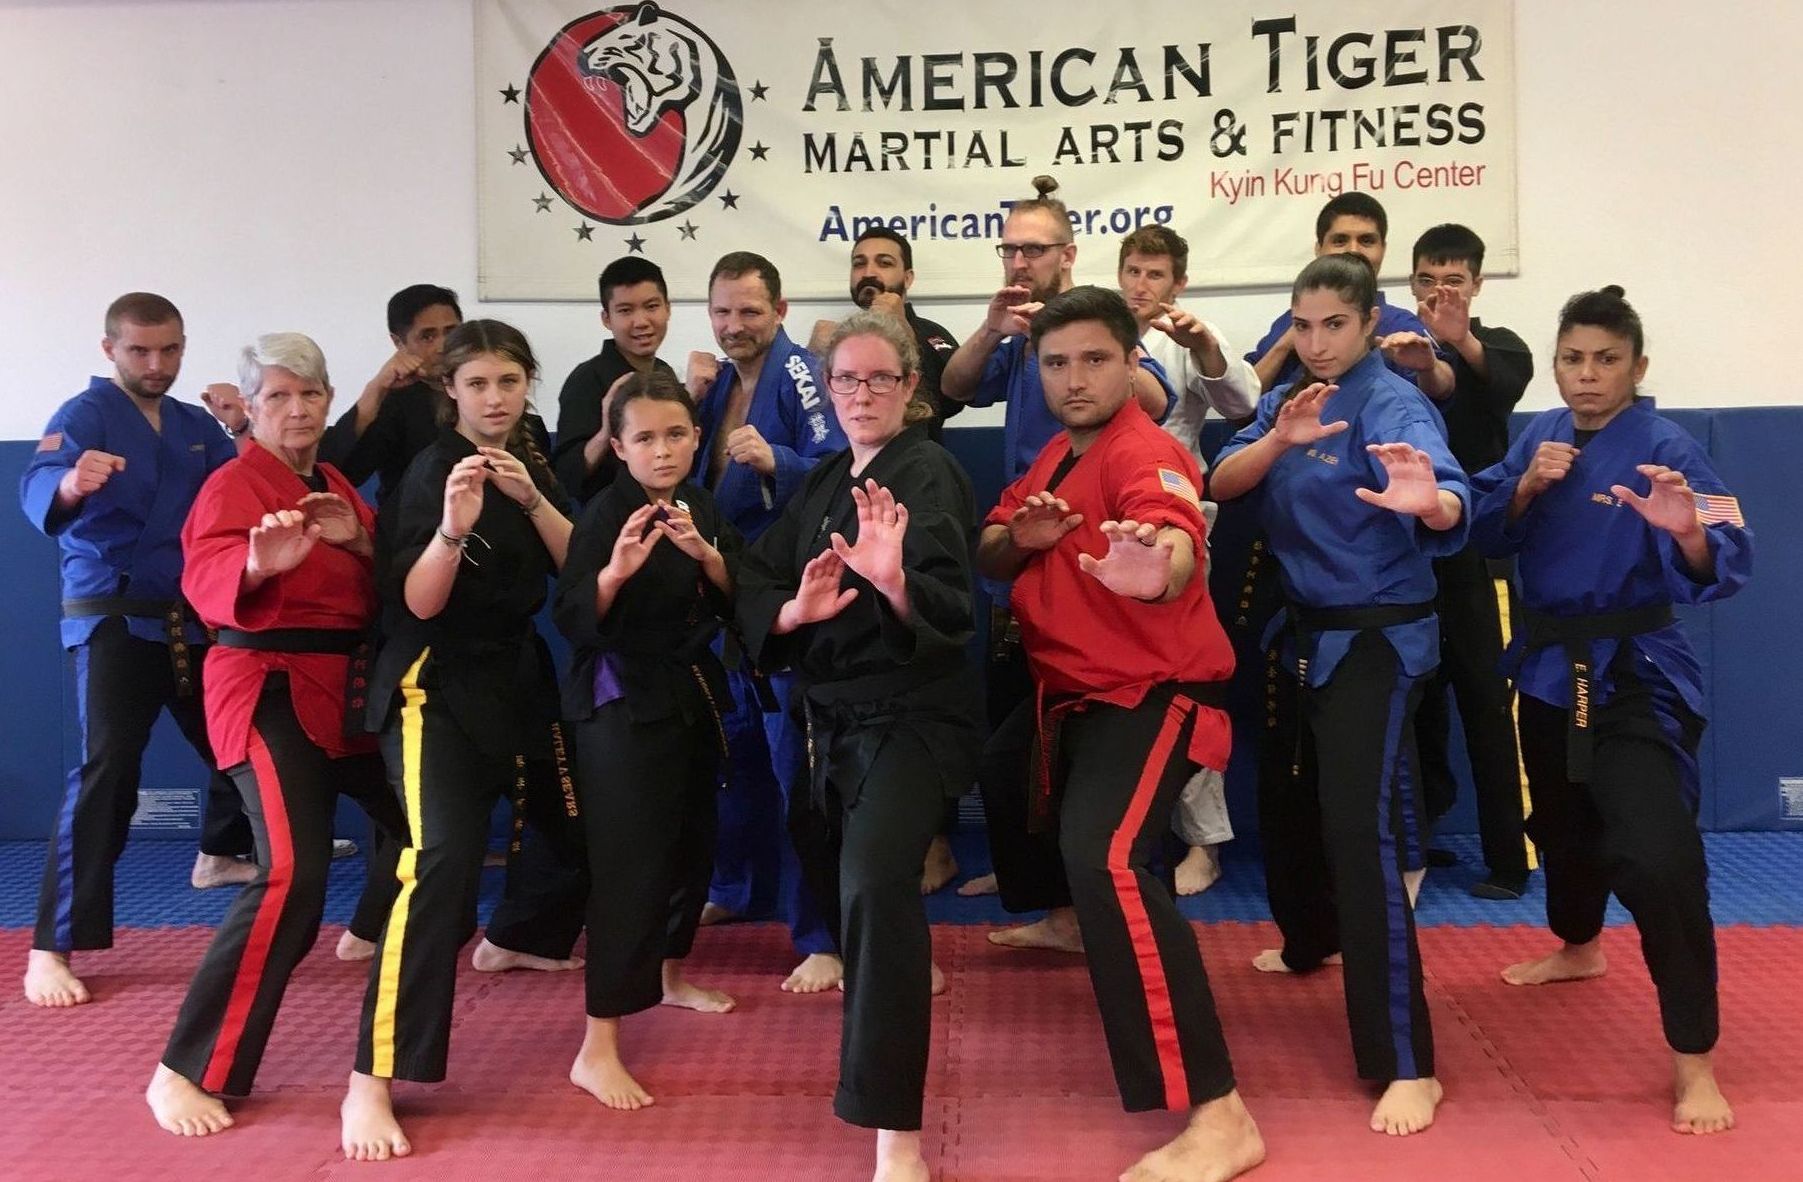 A group of people standing in front of a sign that says american tiger martial arts & fitness